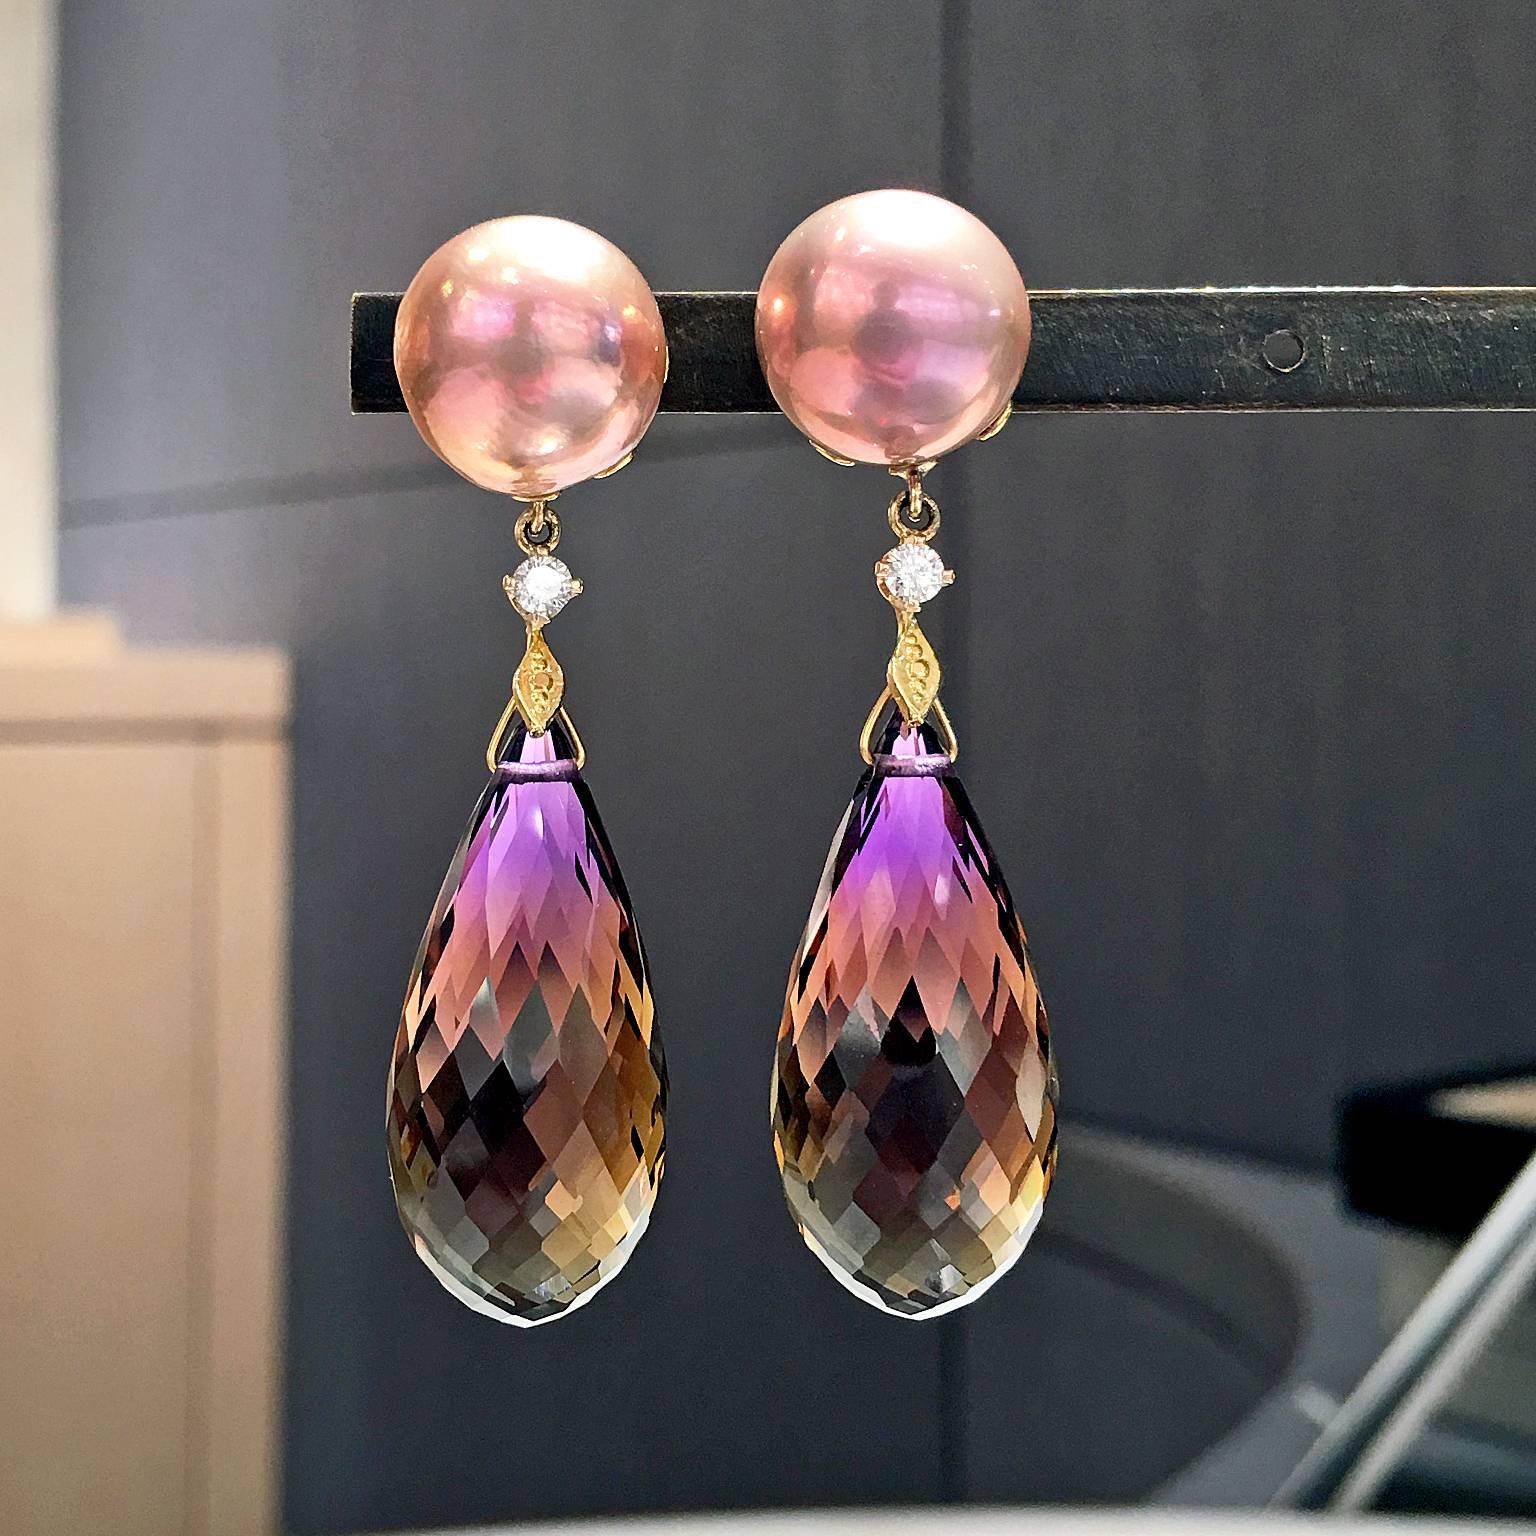 One-of-a-Kind Earrings handcrafted in 18k yellow gold by jewelry artist Russell Trusso featuring a matched pair of faceted ametrine dangling from a round brilliant-cut white diamond accented drop and attached to a matched pair of golden pink